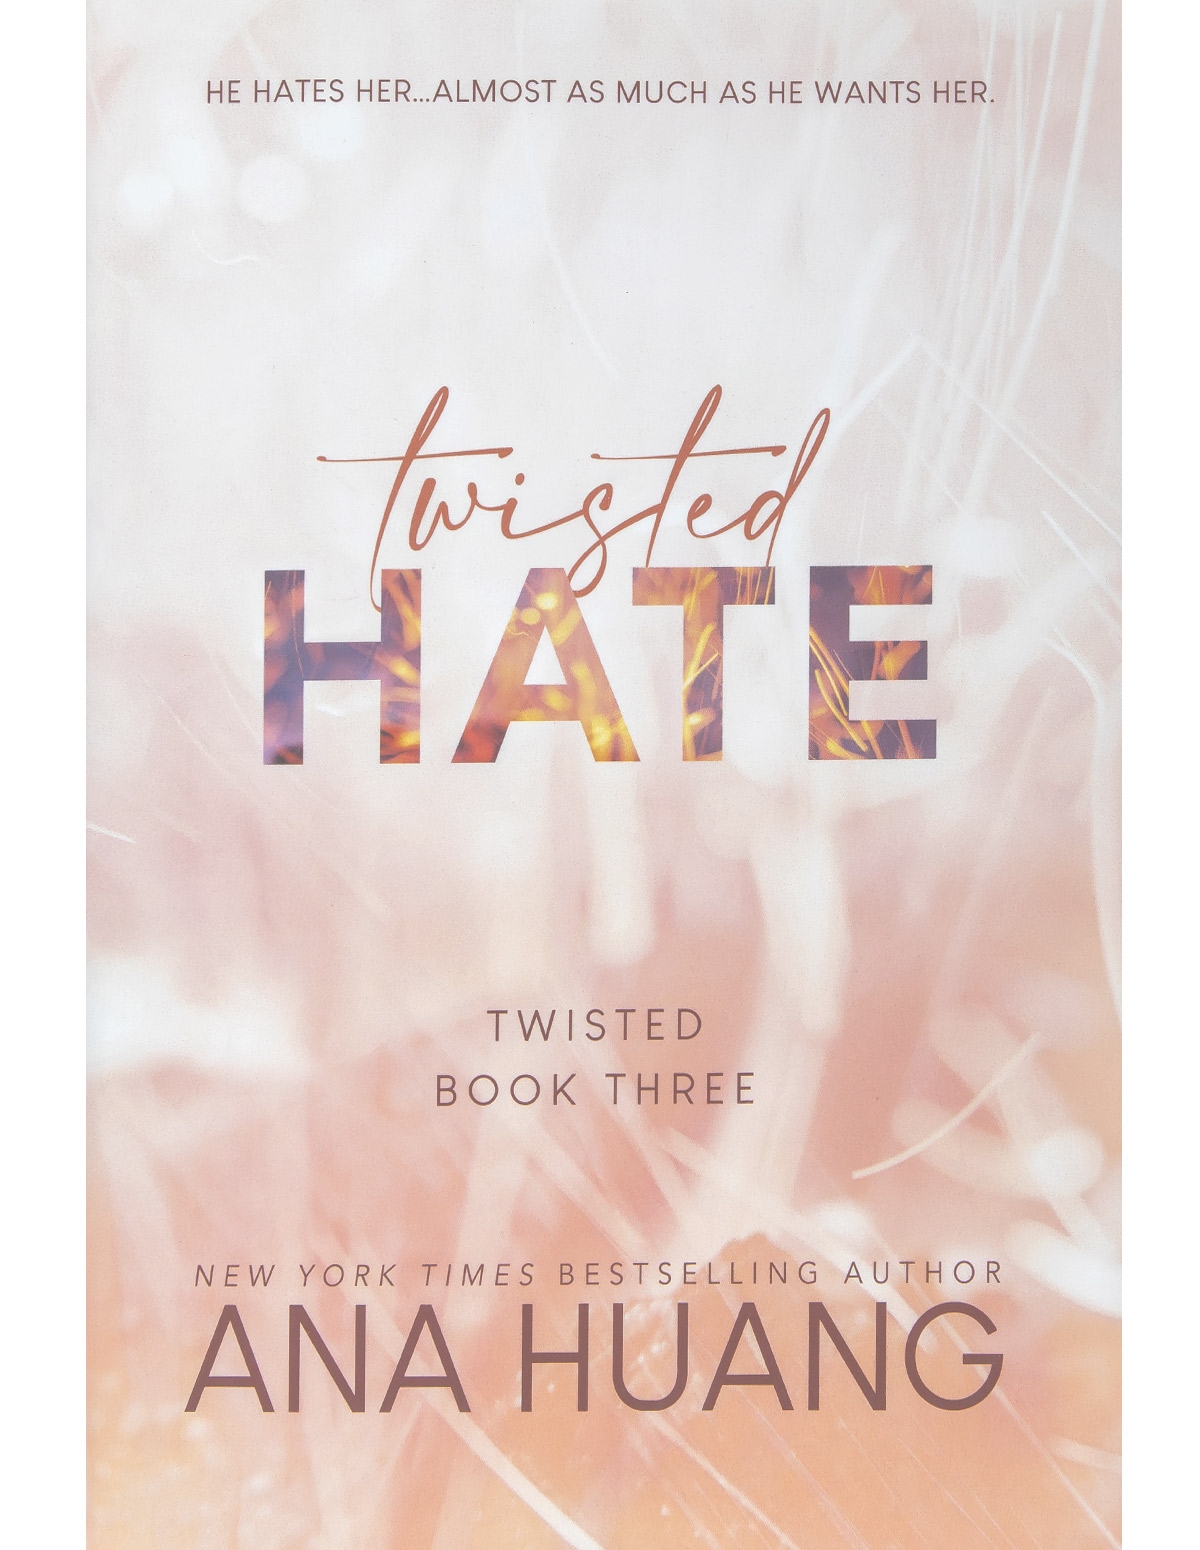 alternate image for Twisted Hate Book - Ana Huang